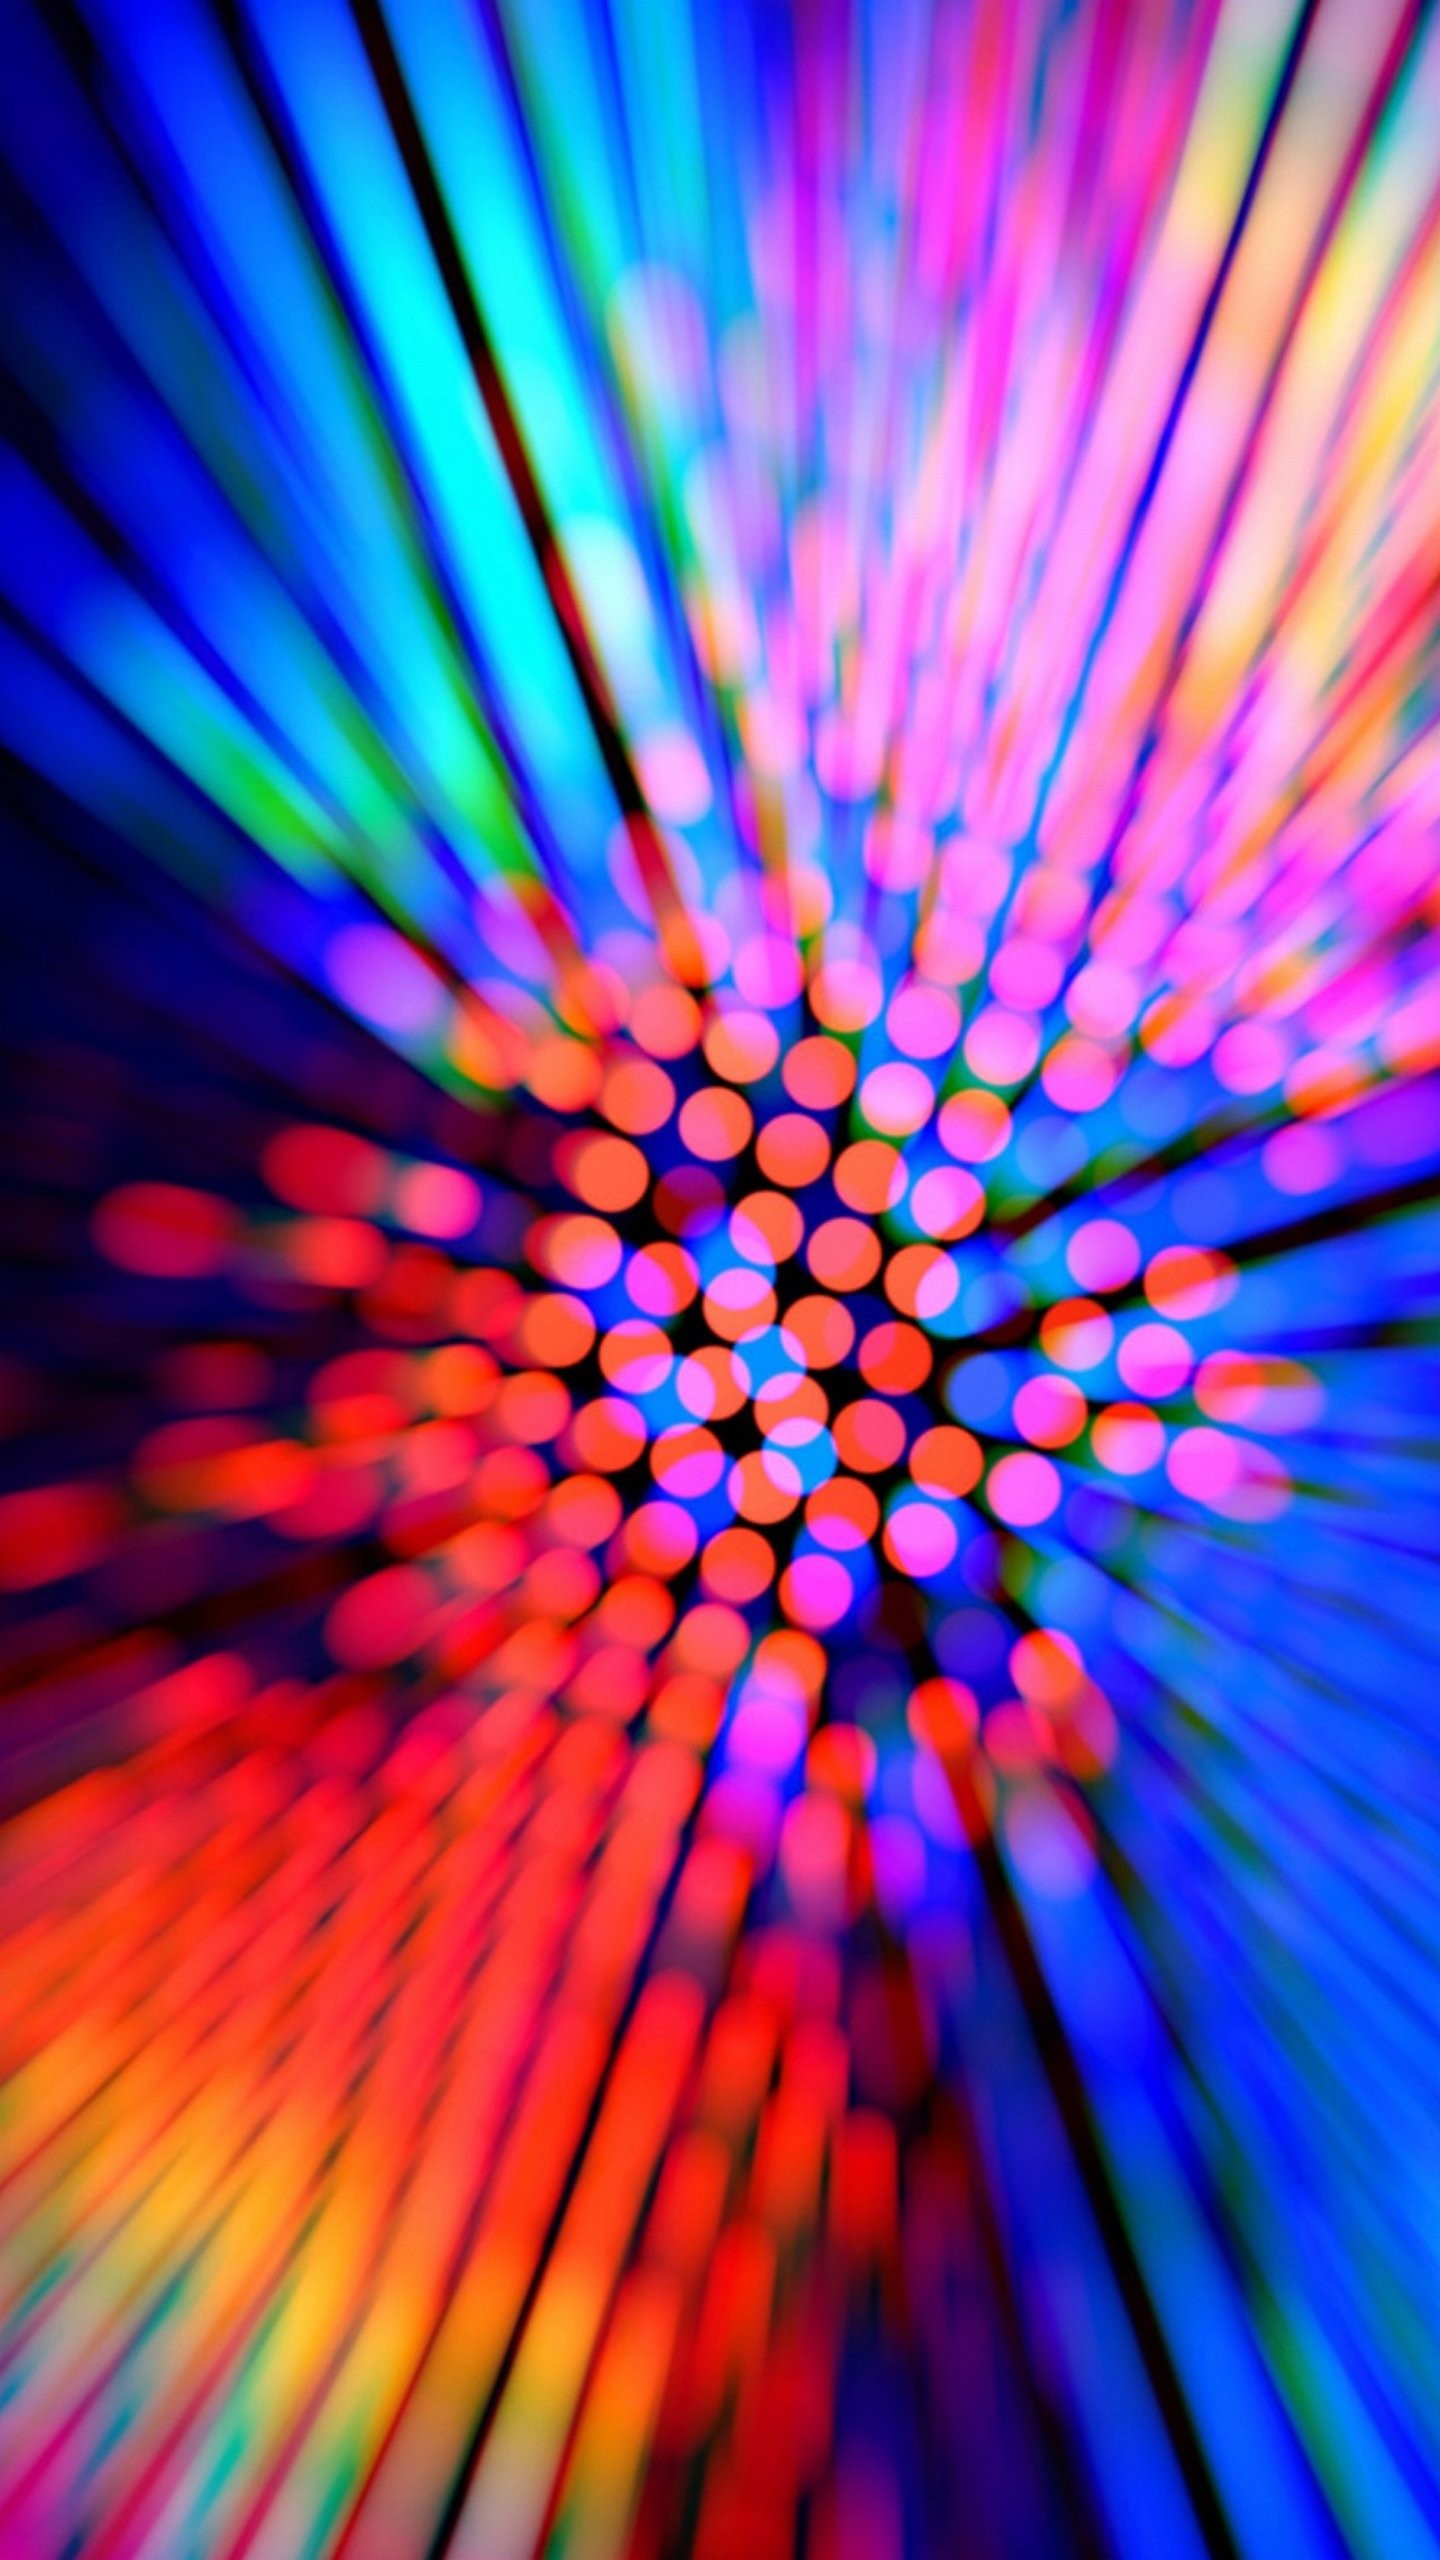 Wallpaper Lg G4 Speed Colors Abstract 1440 2560